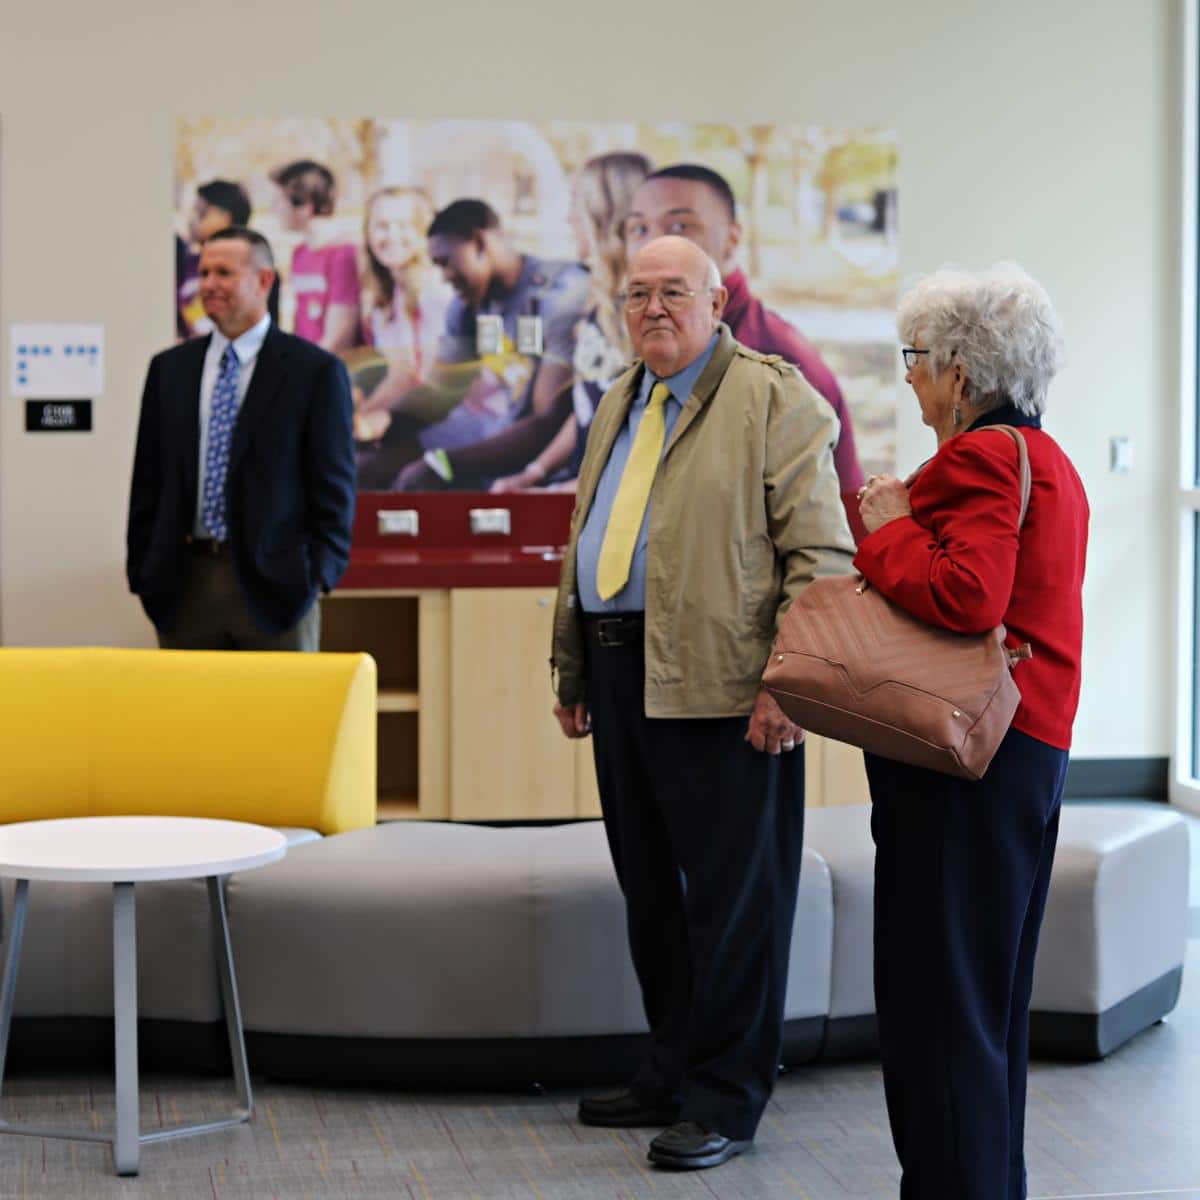 Former PRCC History Instructor Mr. Walt Lowe and his wife Myra Lowe admire the new interior of Seal Hall where he taught. PRCC President Dr. Adam Breerwood stands in the background. 